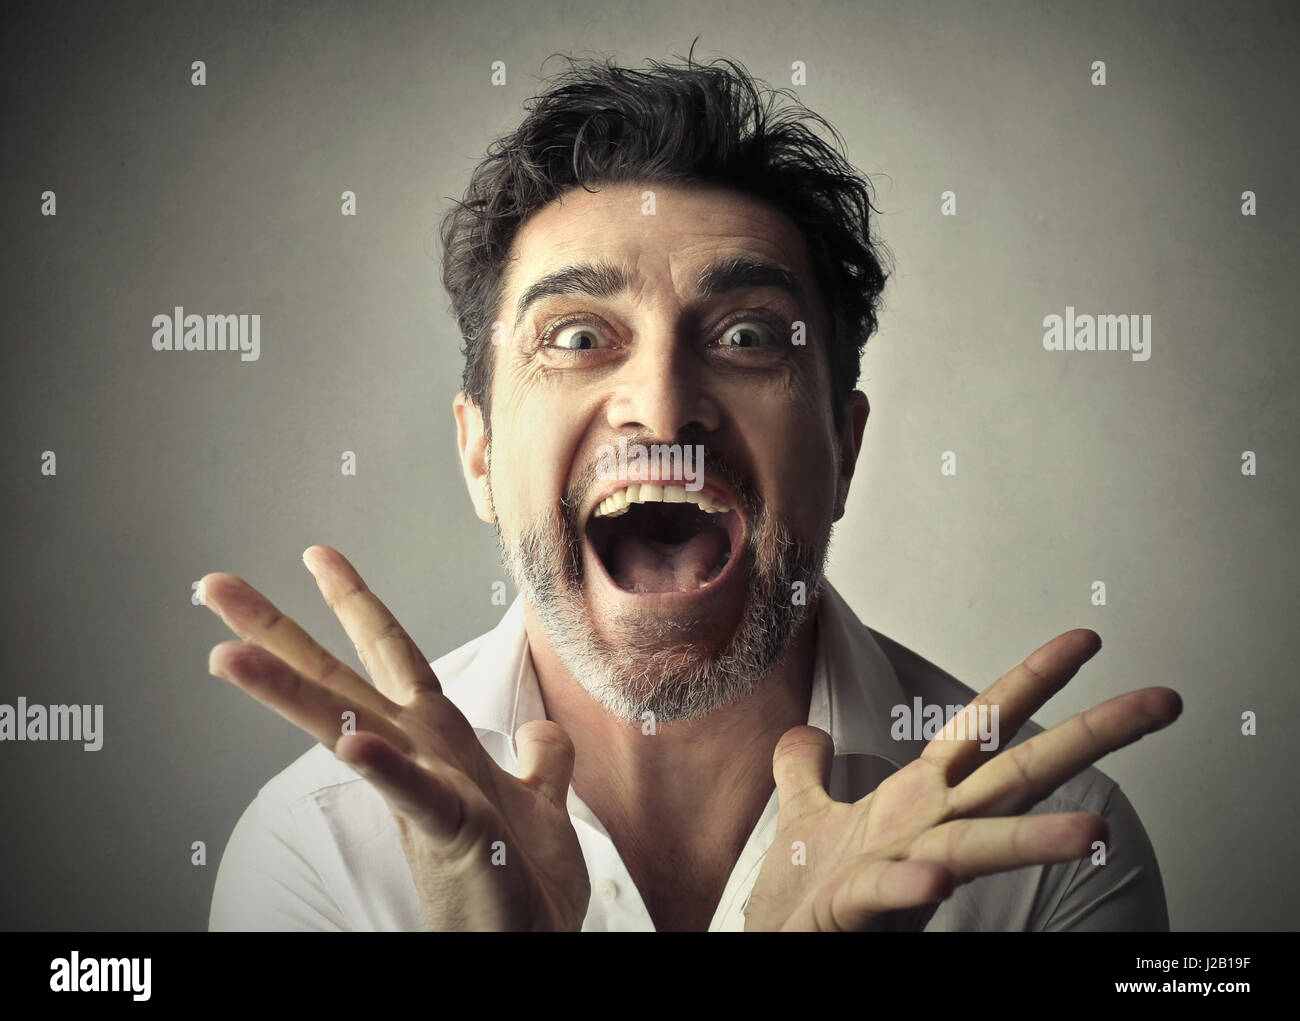 Excited businessman looking into camera Stock Photo